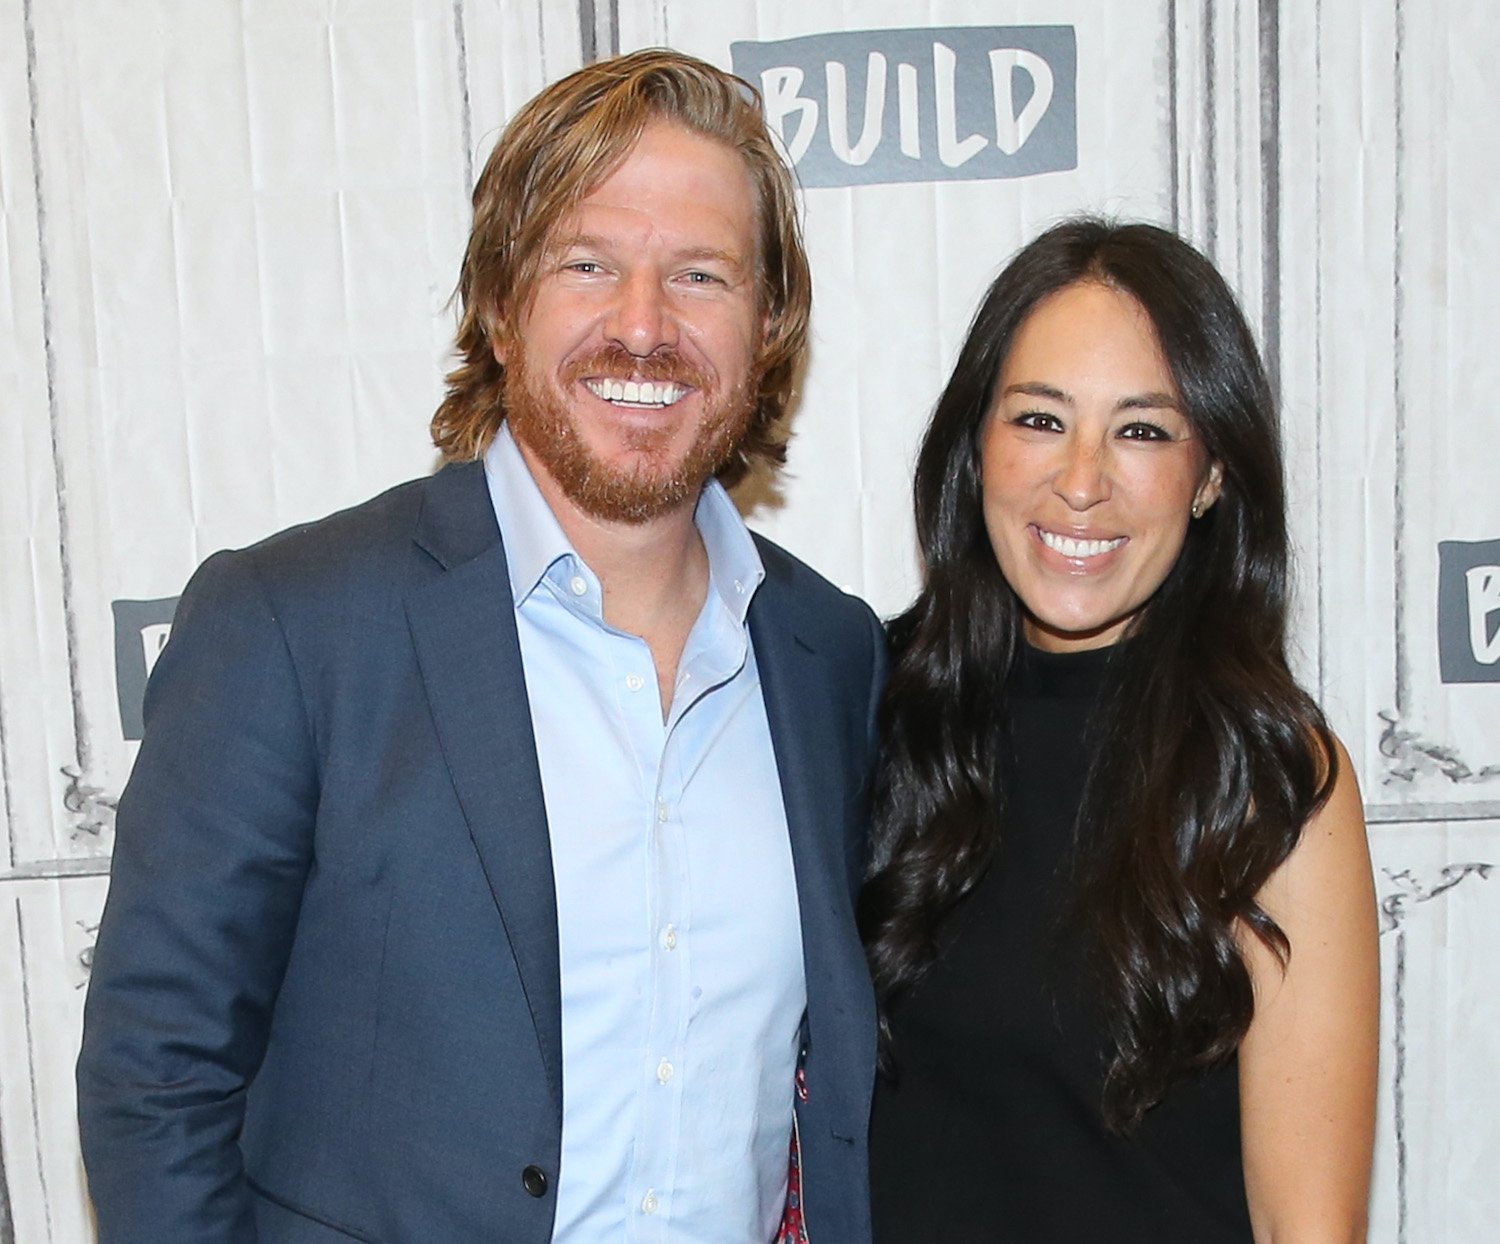 Chip Gaines and Joanna Gaines attend the Build Series in 2017